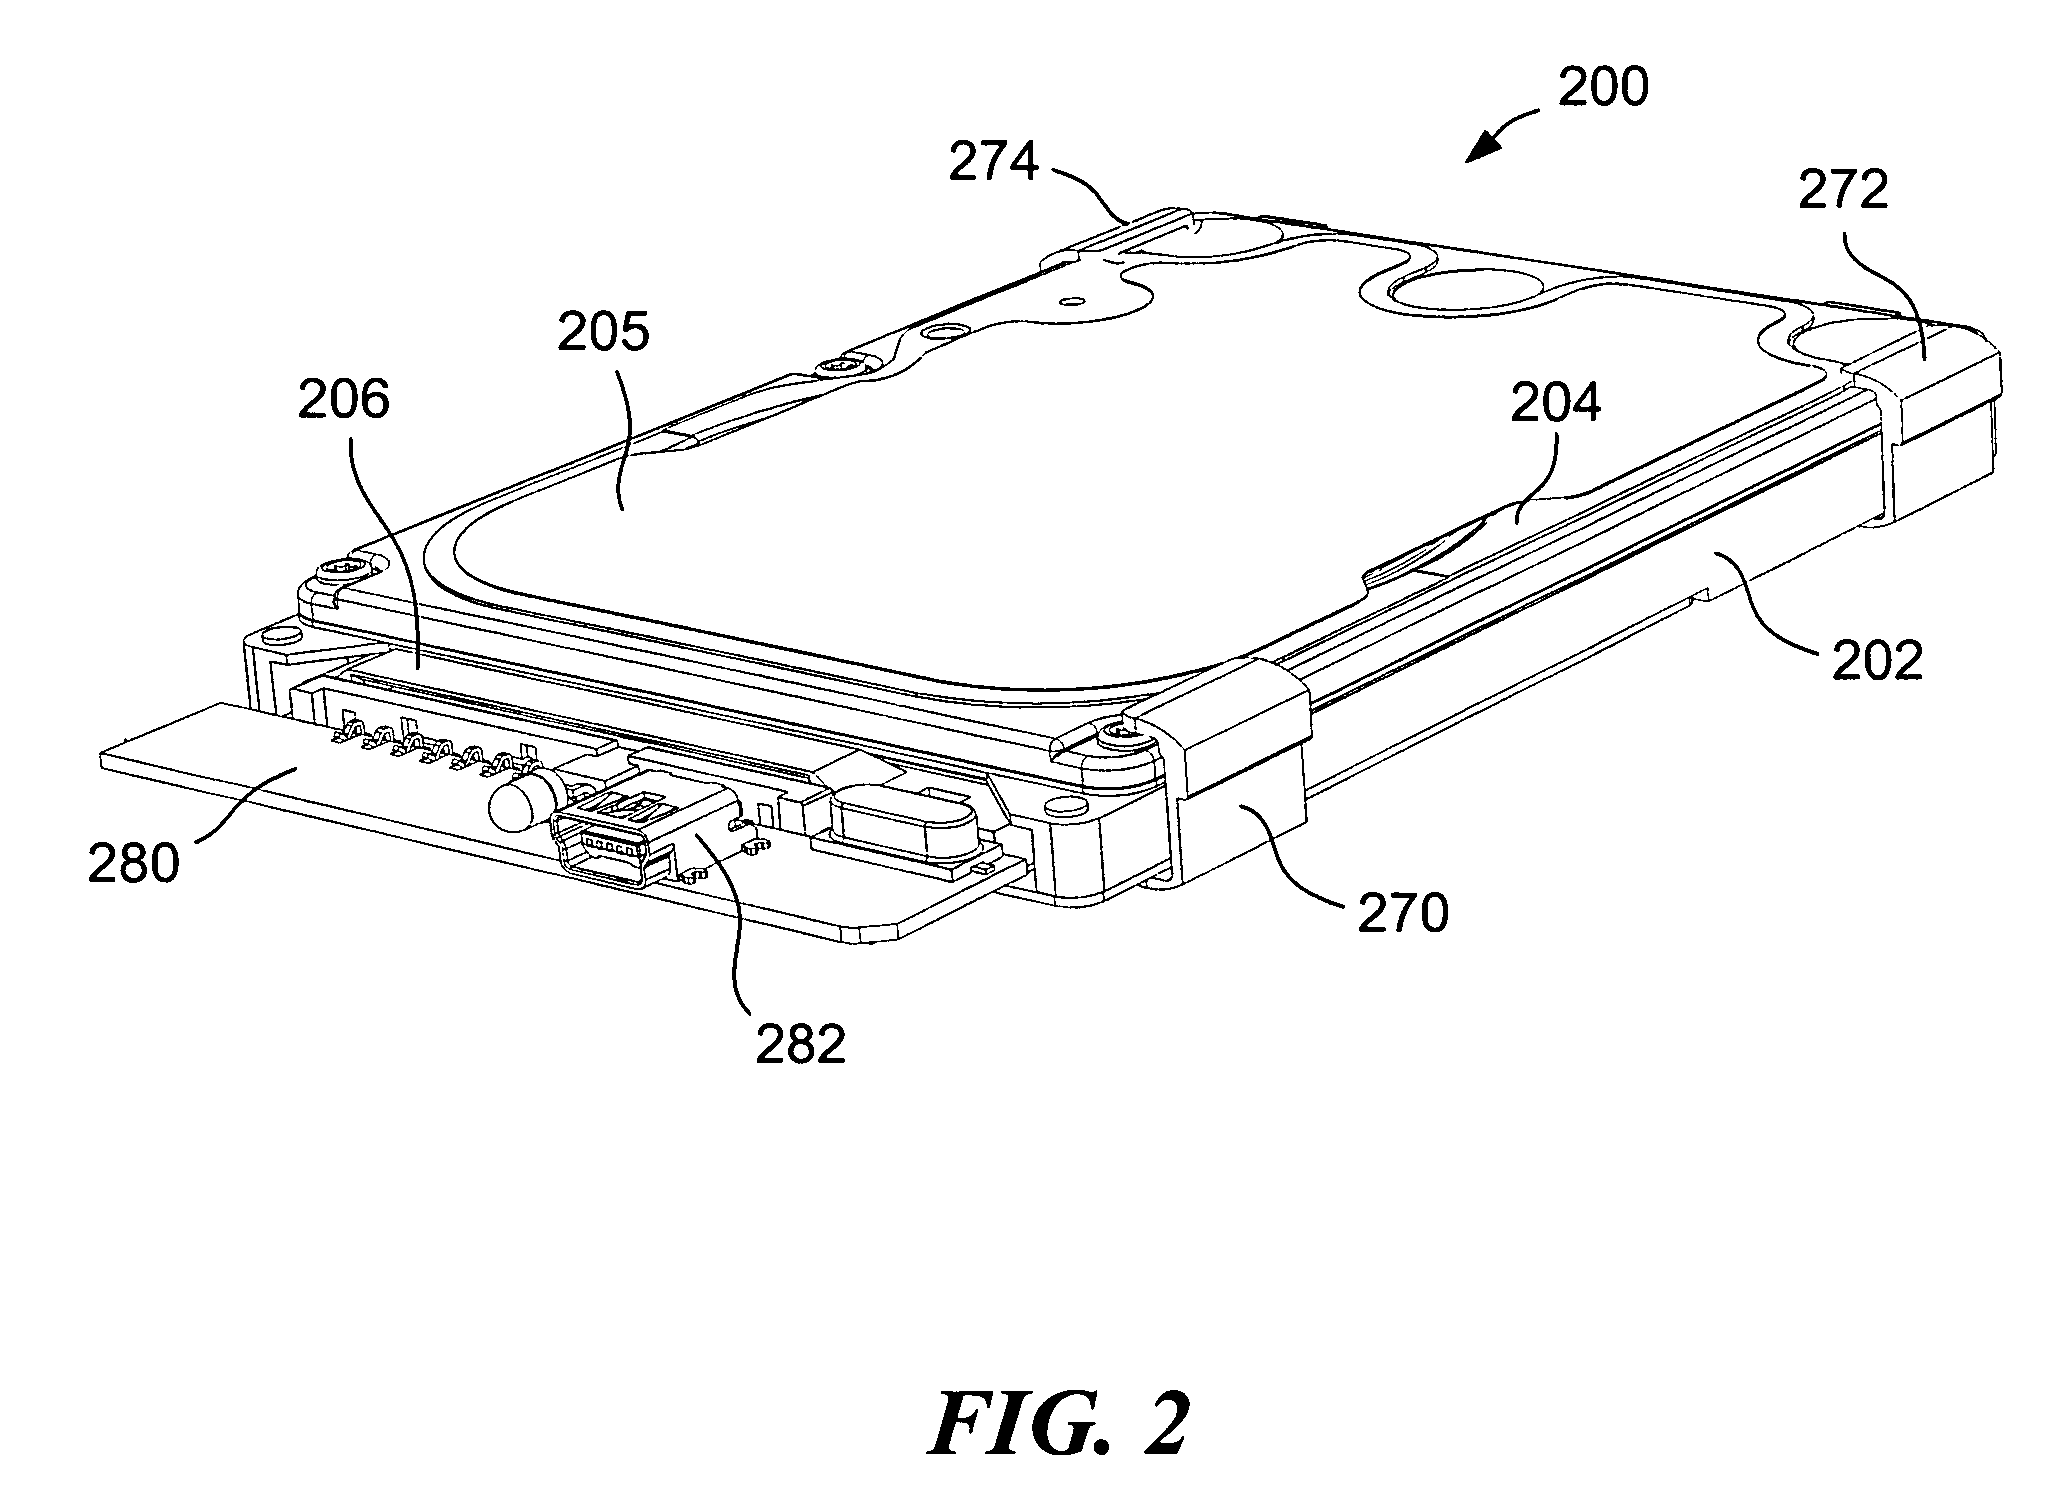 Information storage device having a disk drive and a bridge controller PCB within a monolithic conductive nest